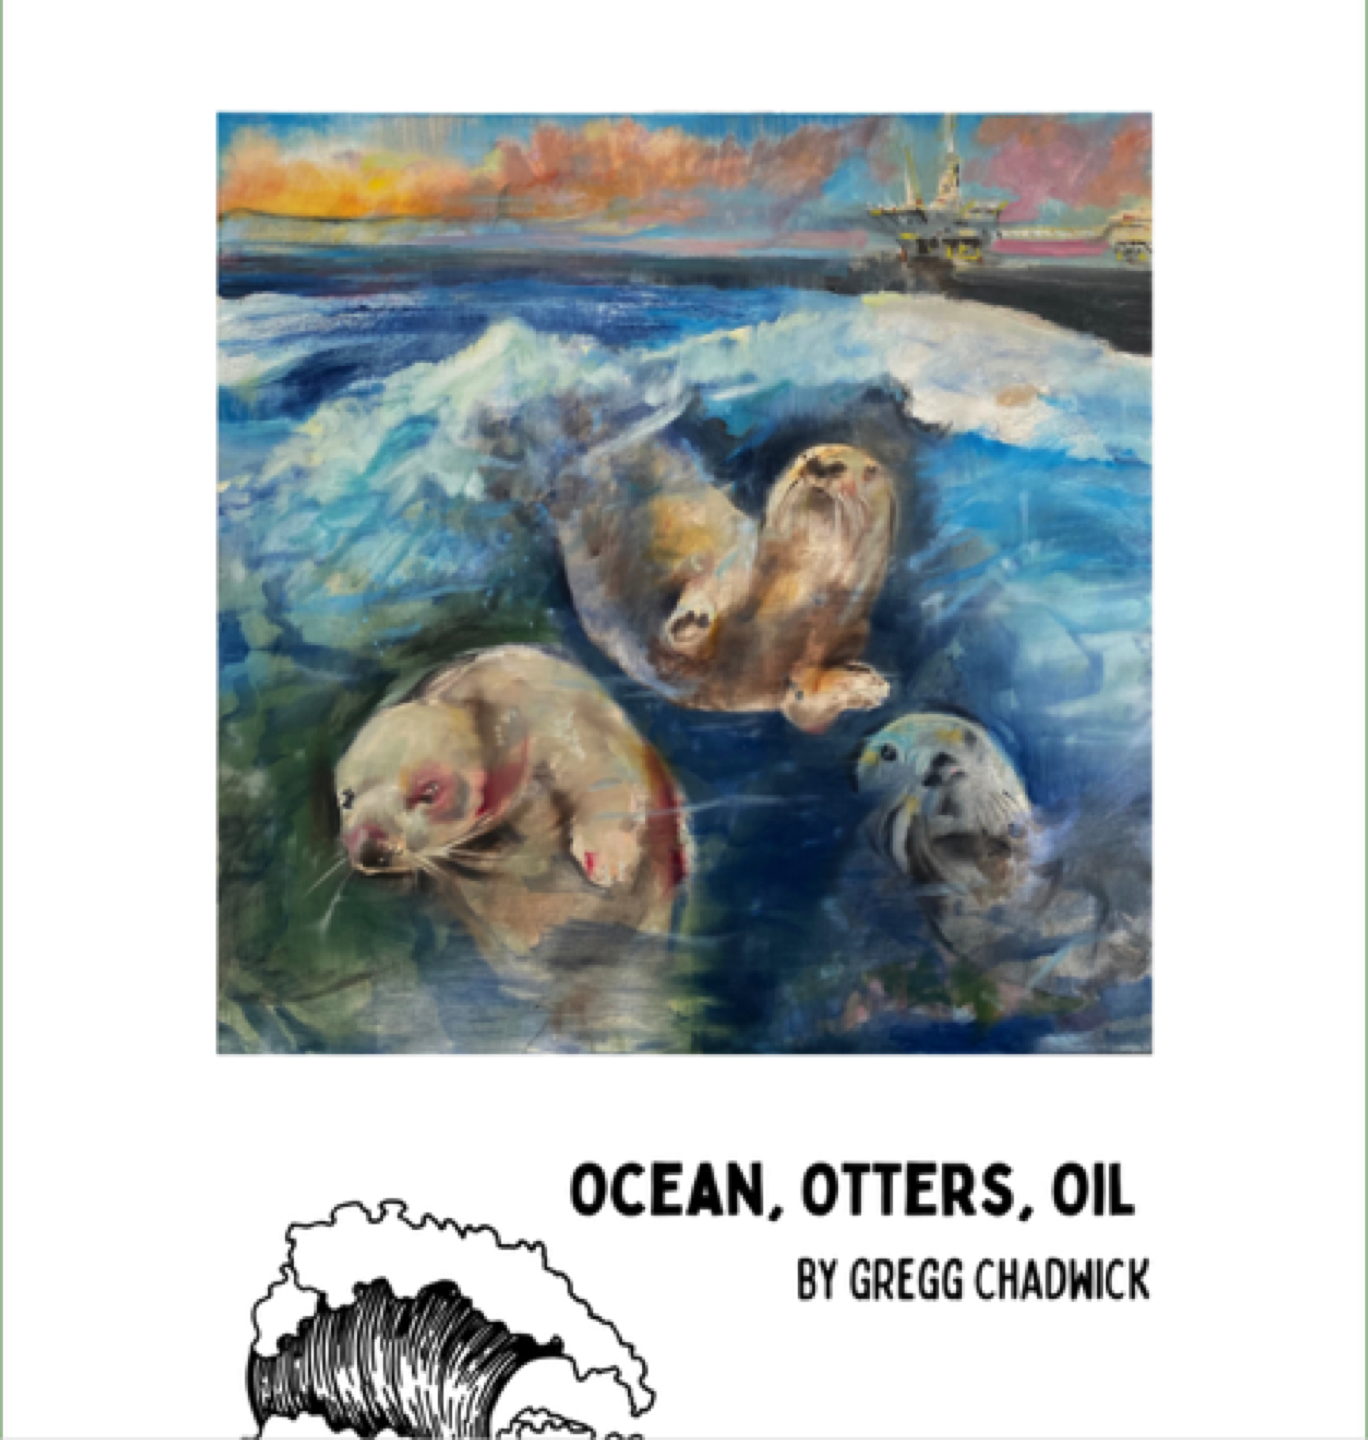 Gregg Chadwick
Ocean, Otters, Oil in Wildlife of the Underworld - Plants and Poetry Journal